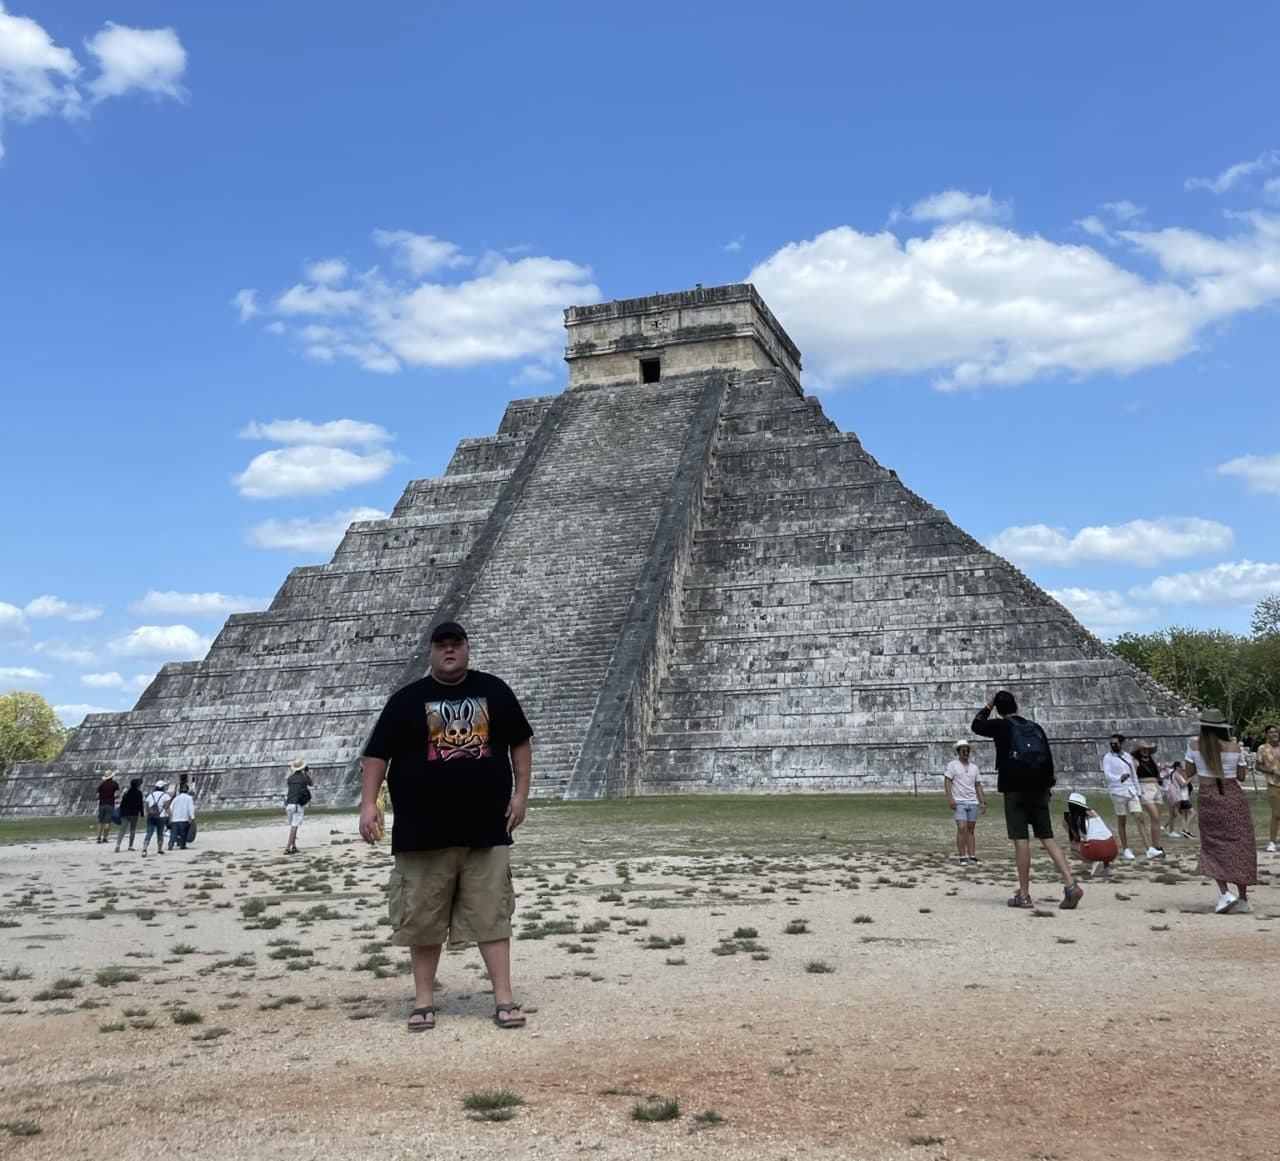 Standing in front of the ancient Mayan temple El Castillo in Chichen Itza located in Mexico